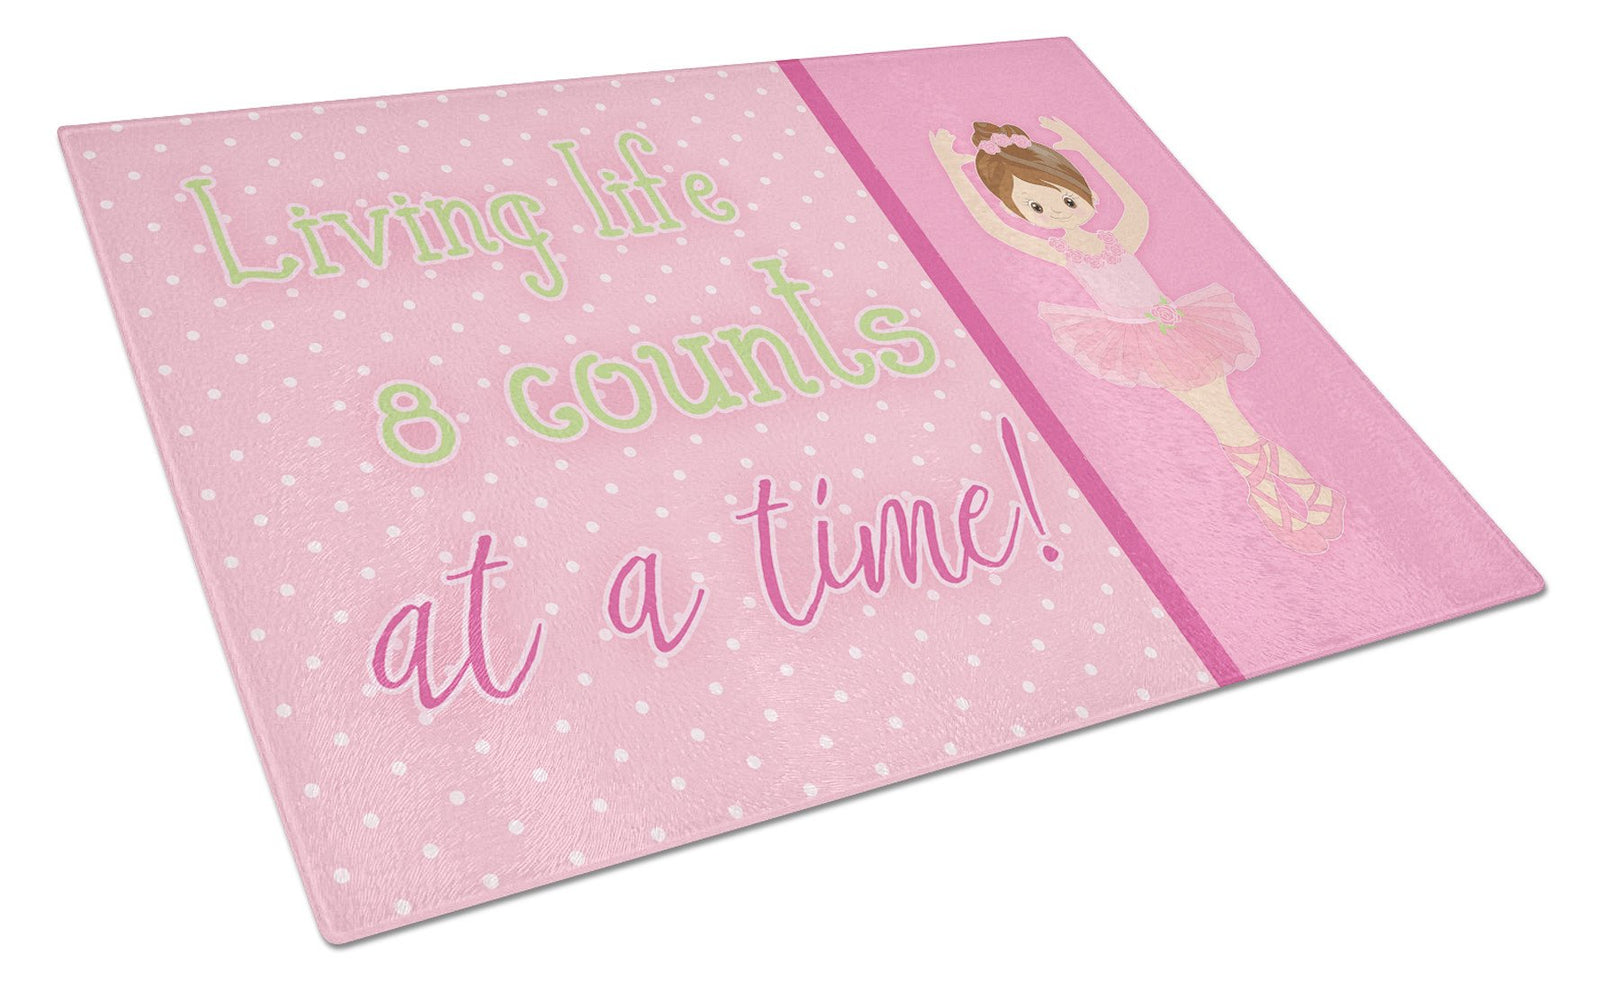 Ballet in 8 Counts Brunette Glass Cutting Board Large BB5396LCB by Caroline's Treasures